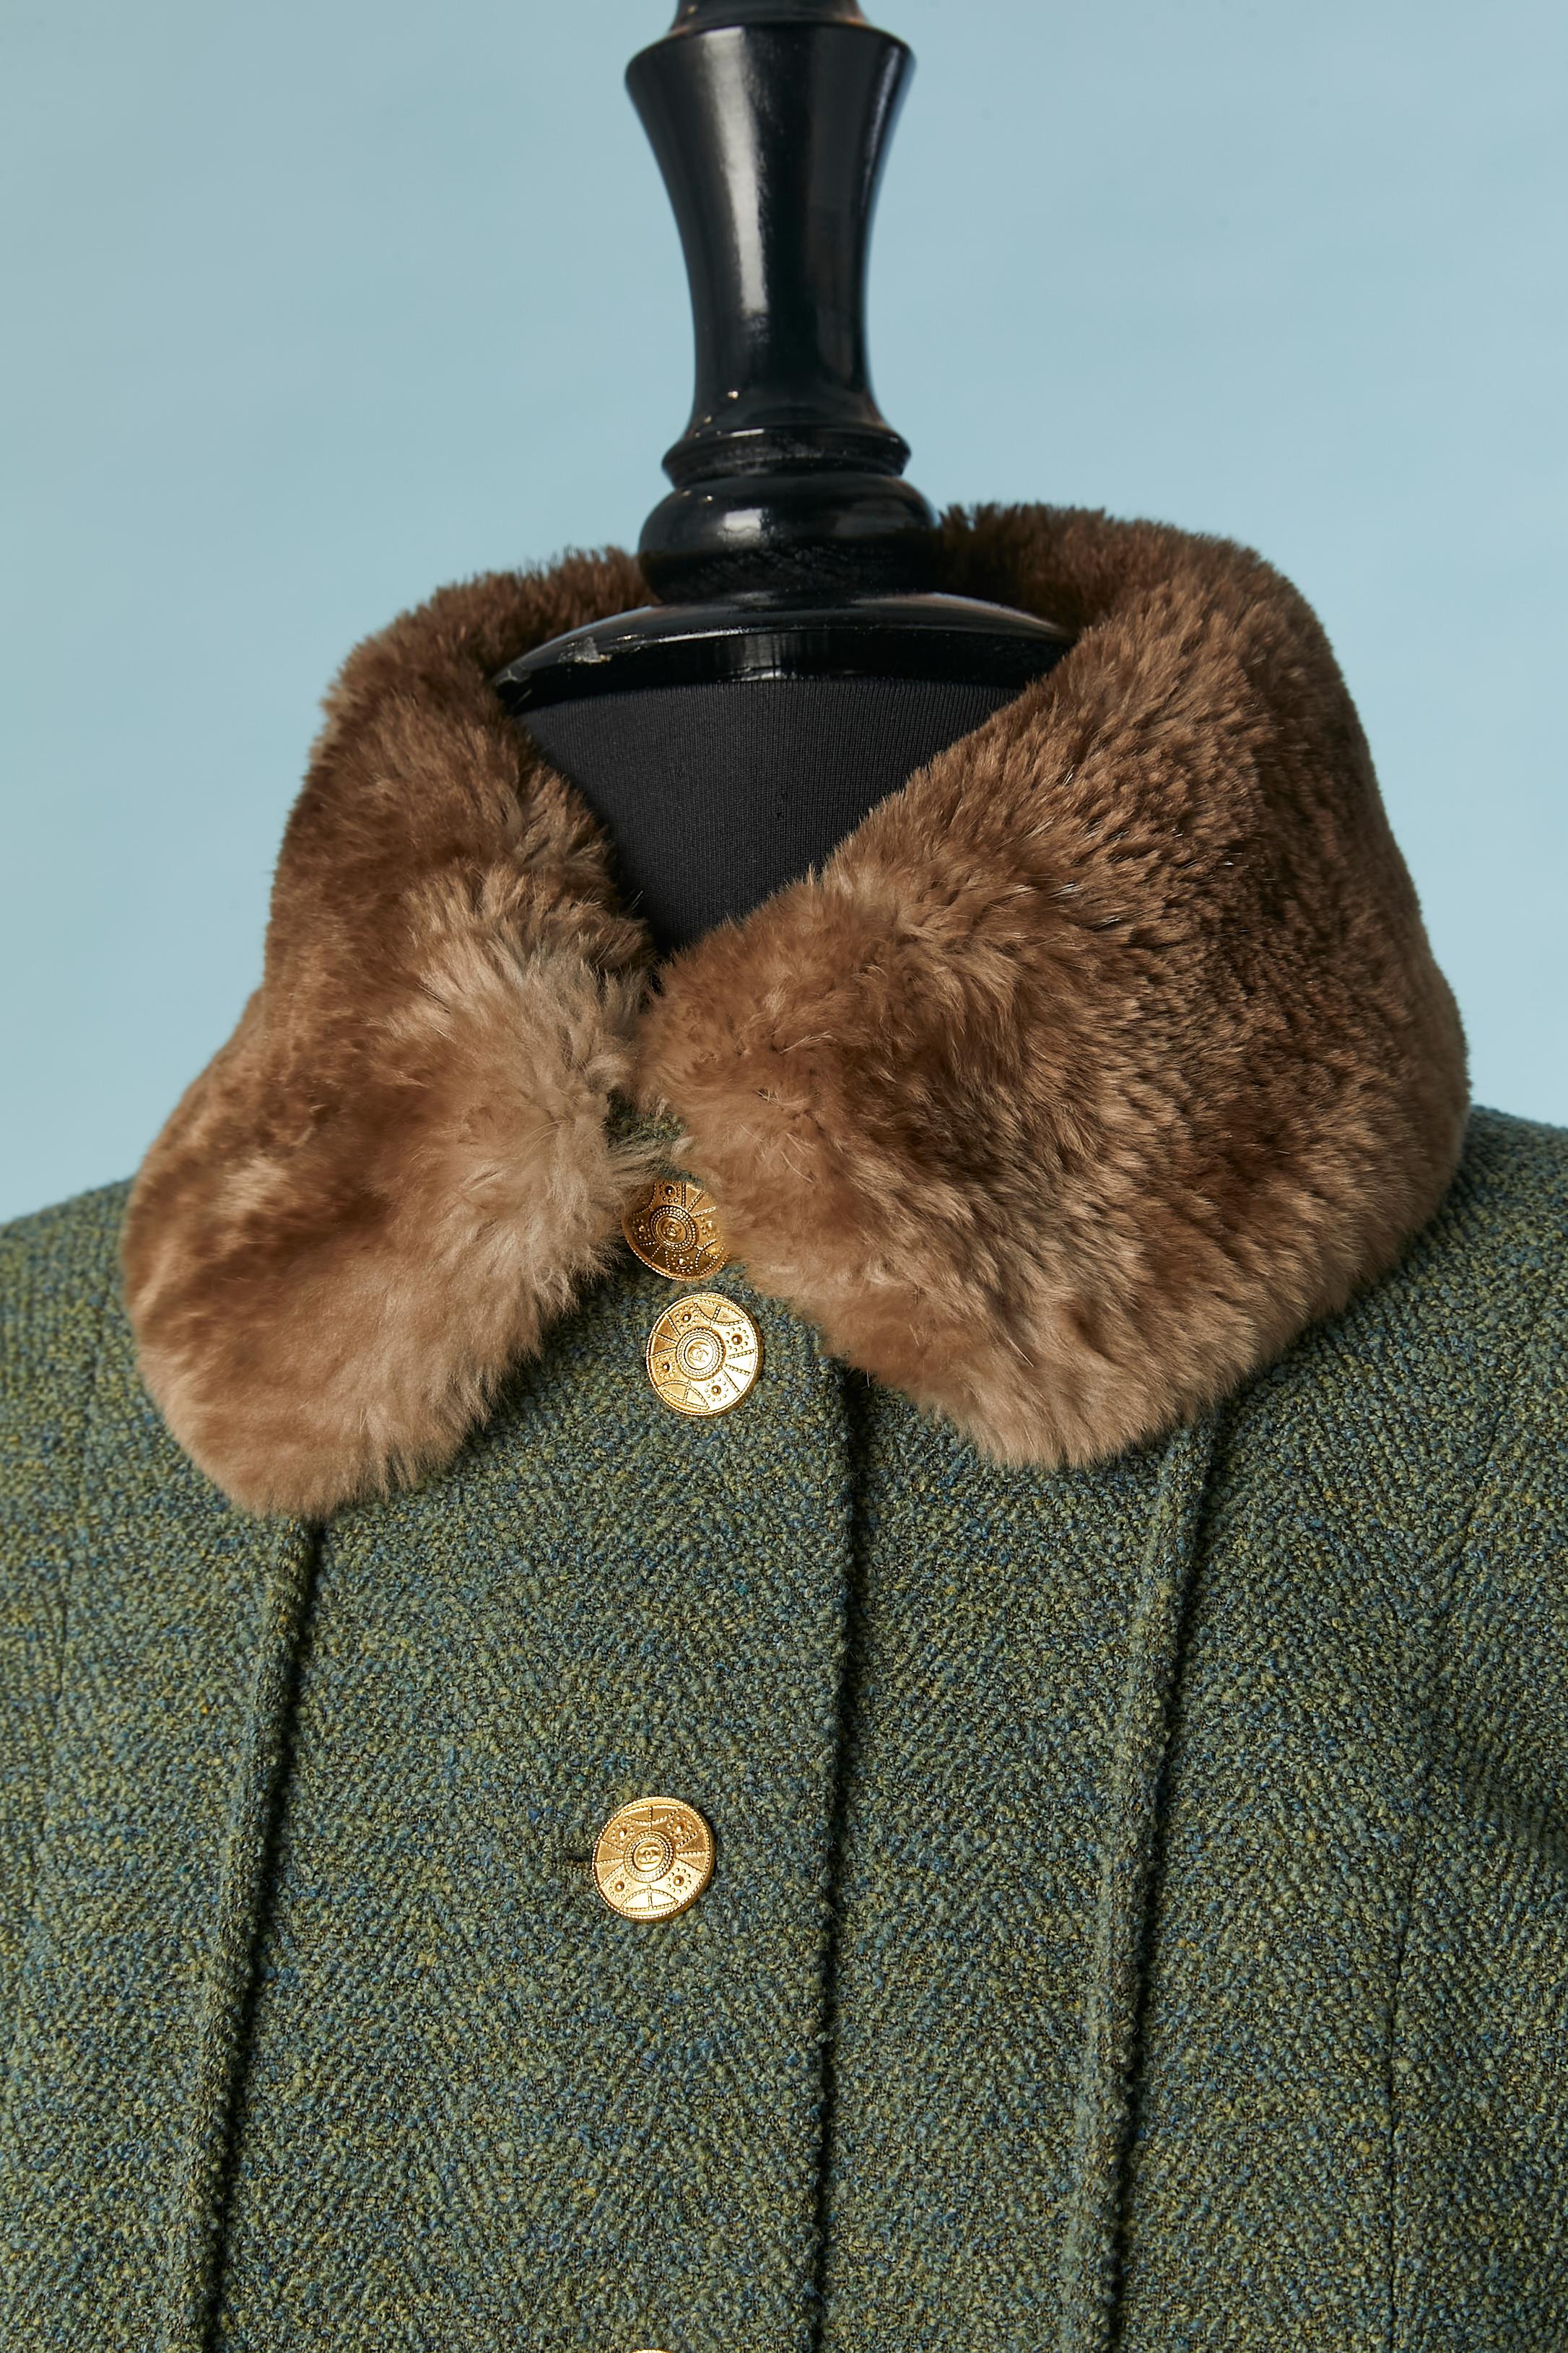 Green wool tweed skirt suit with gold metal branded buttons and fur ( probably chinchilla) pompoms . Main fabric composition: 85% wool, 15% cashmere. Silk branded lining. 
Shoulder-pad. Pockets on both side. 
SIZE L (jacket) and M ( skirt) 
